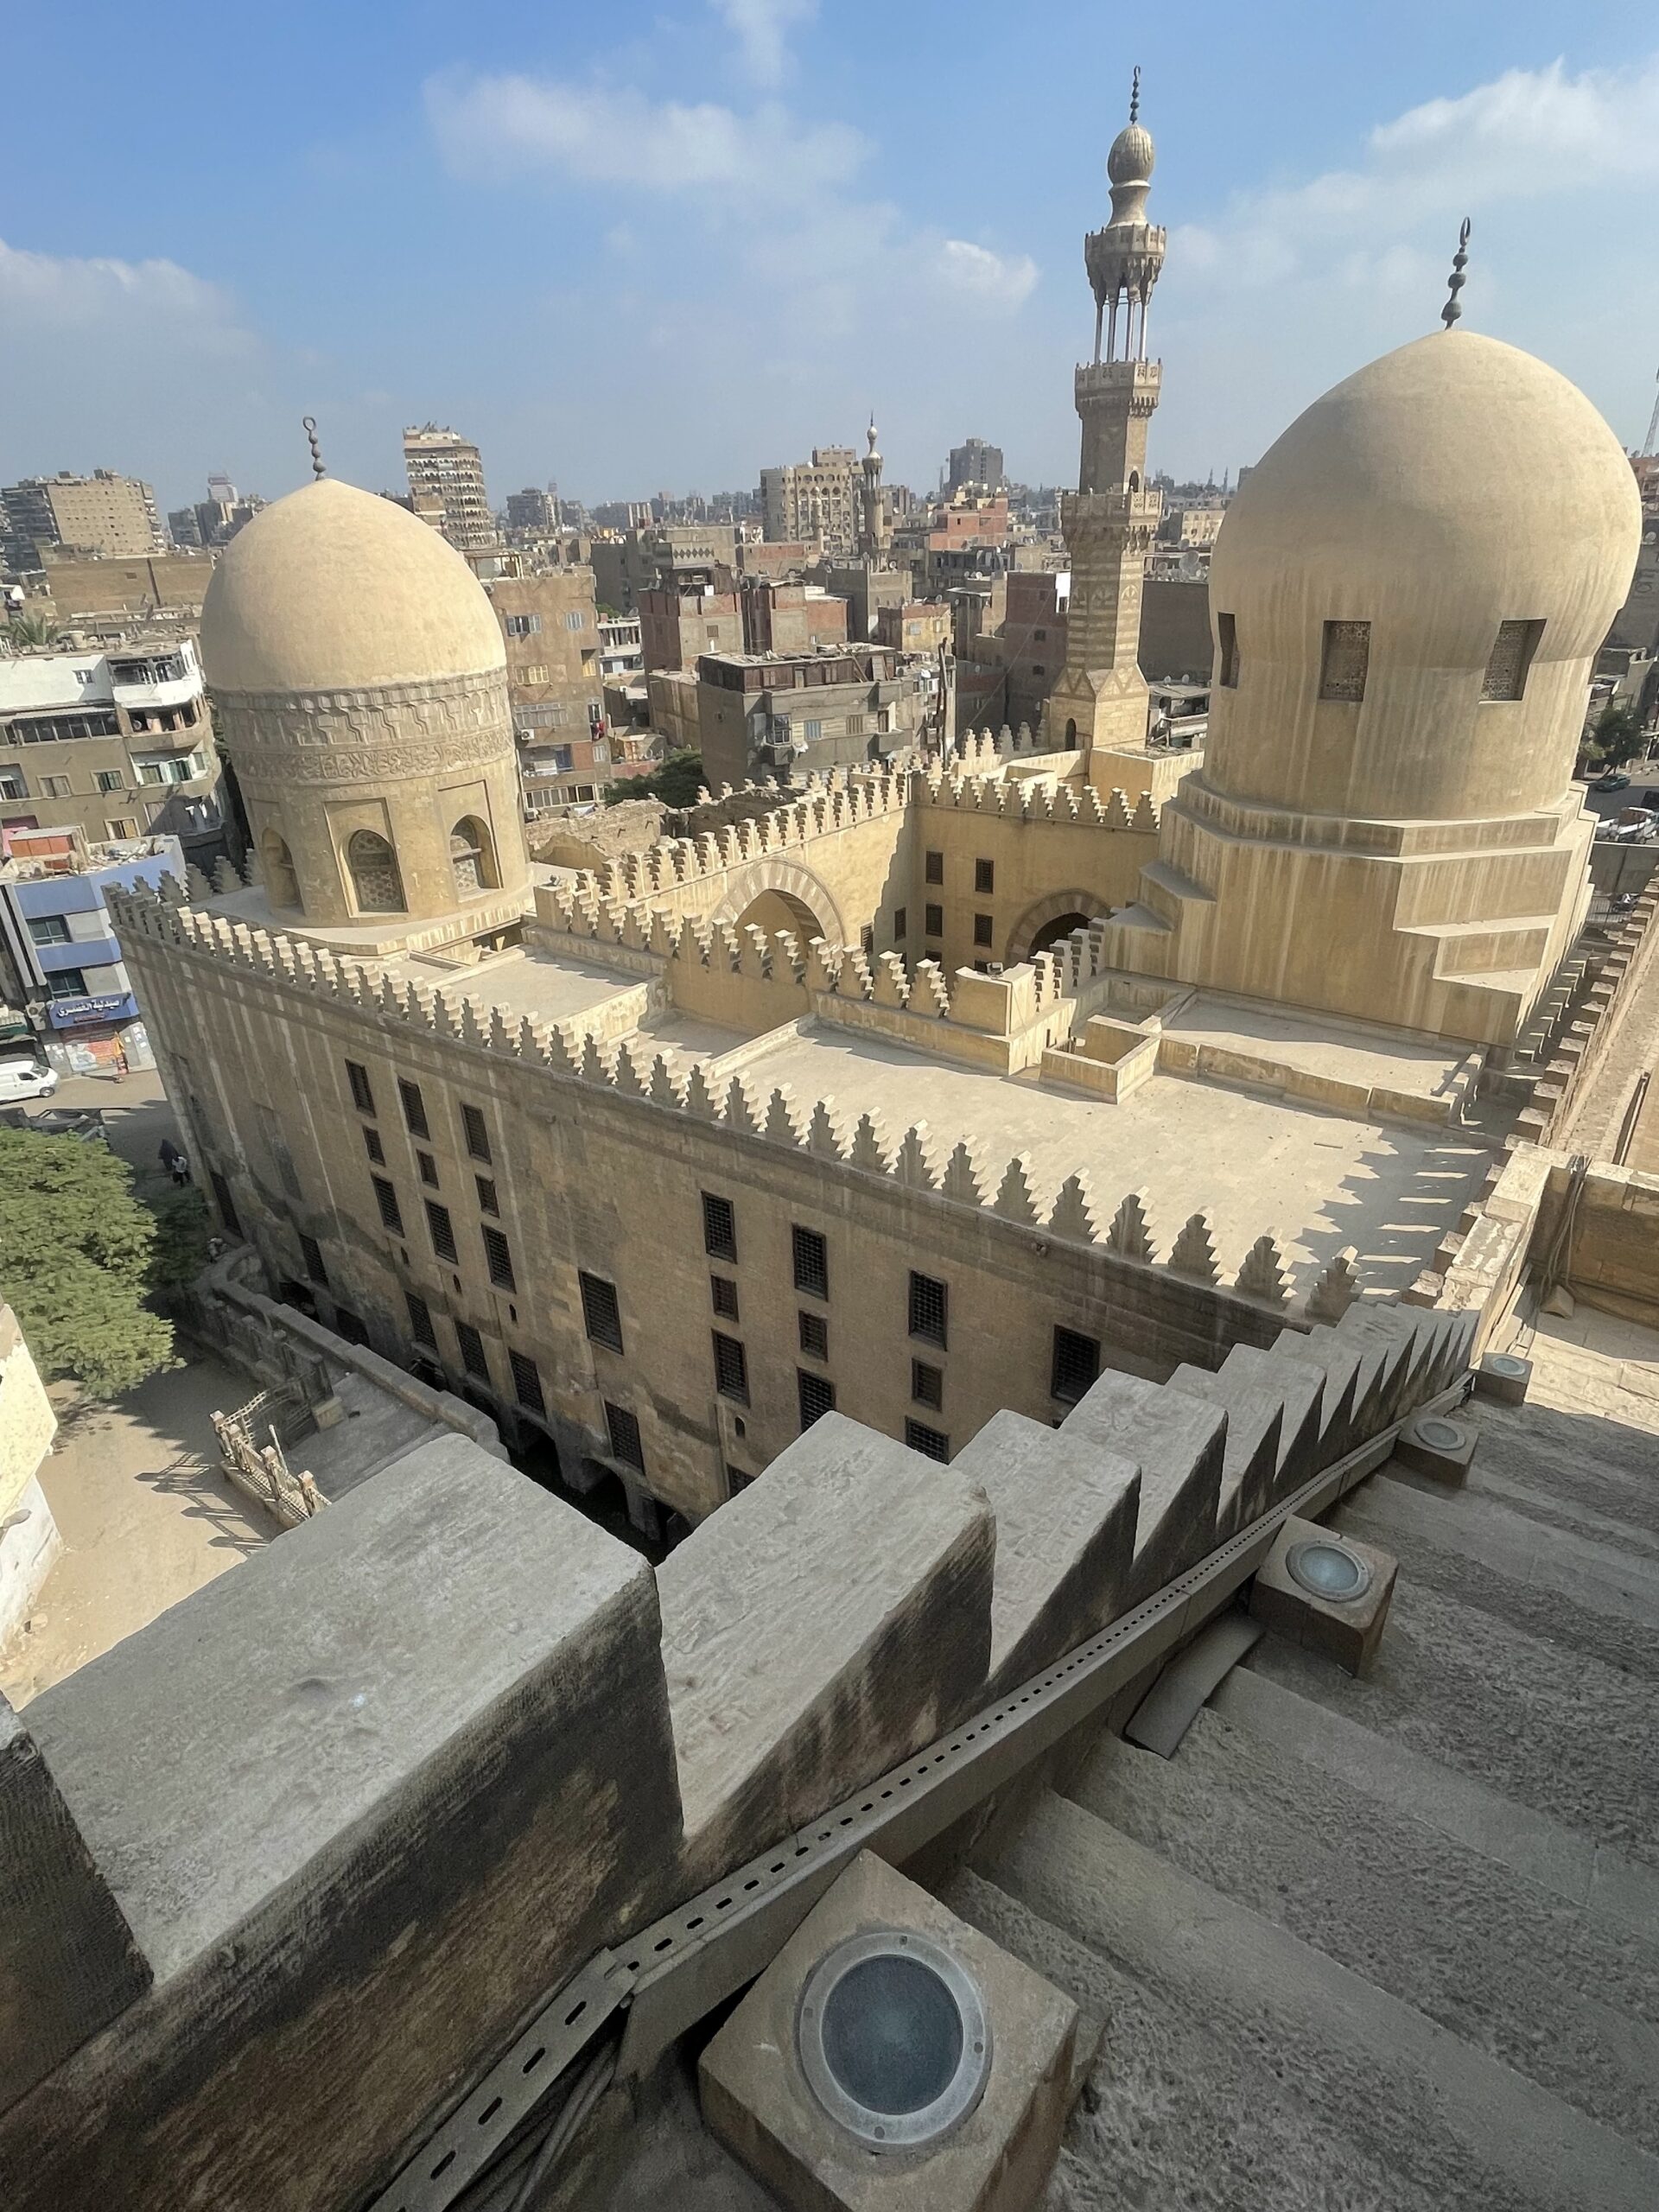 Arab and Islamic Civilizations: The City of Cairo